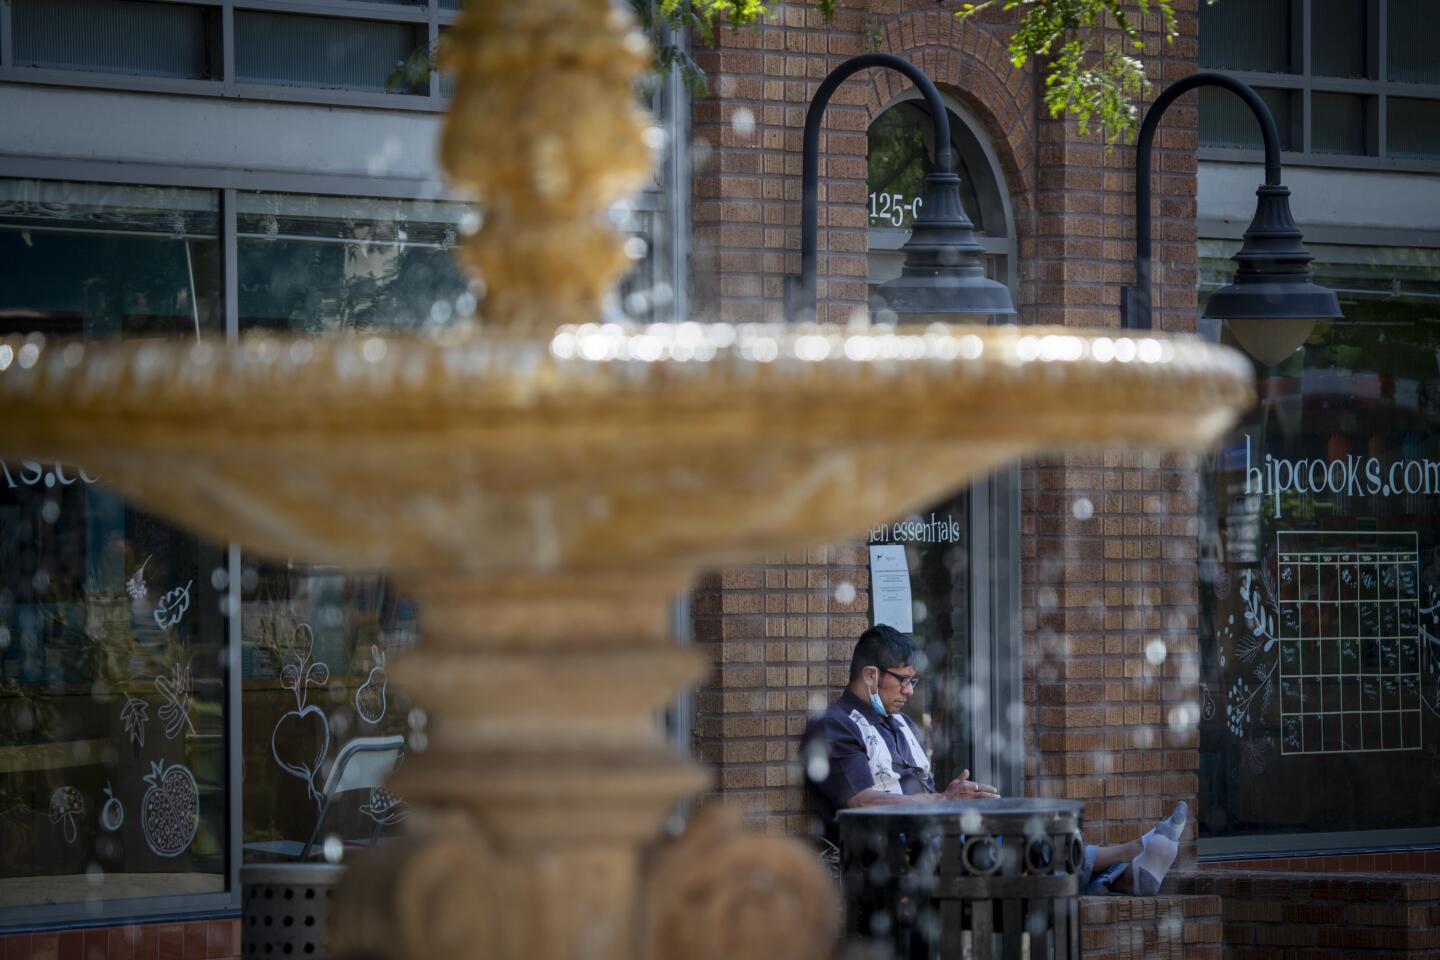 Ray Gonzalez takes a break from the heat near a water fountain after having lunch in the arts district in downtown Santa Ana.